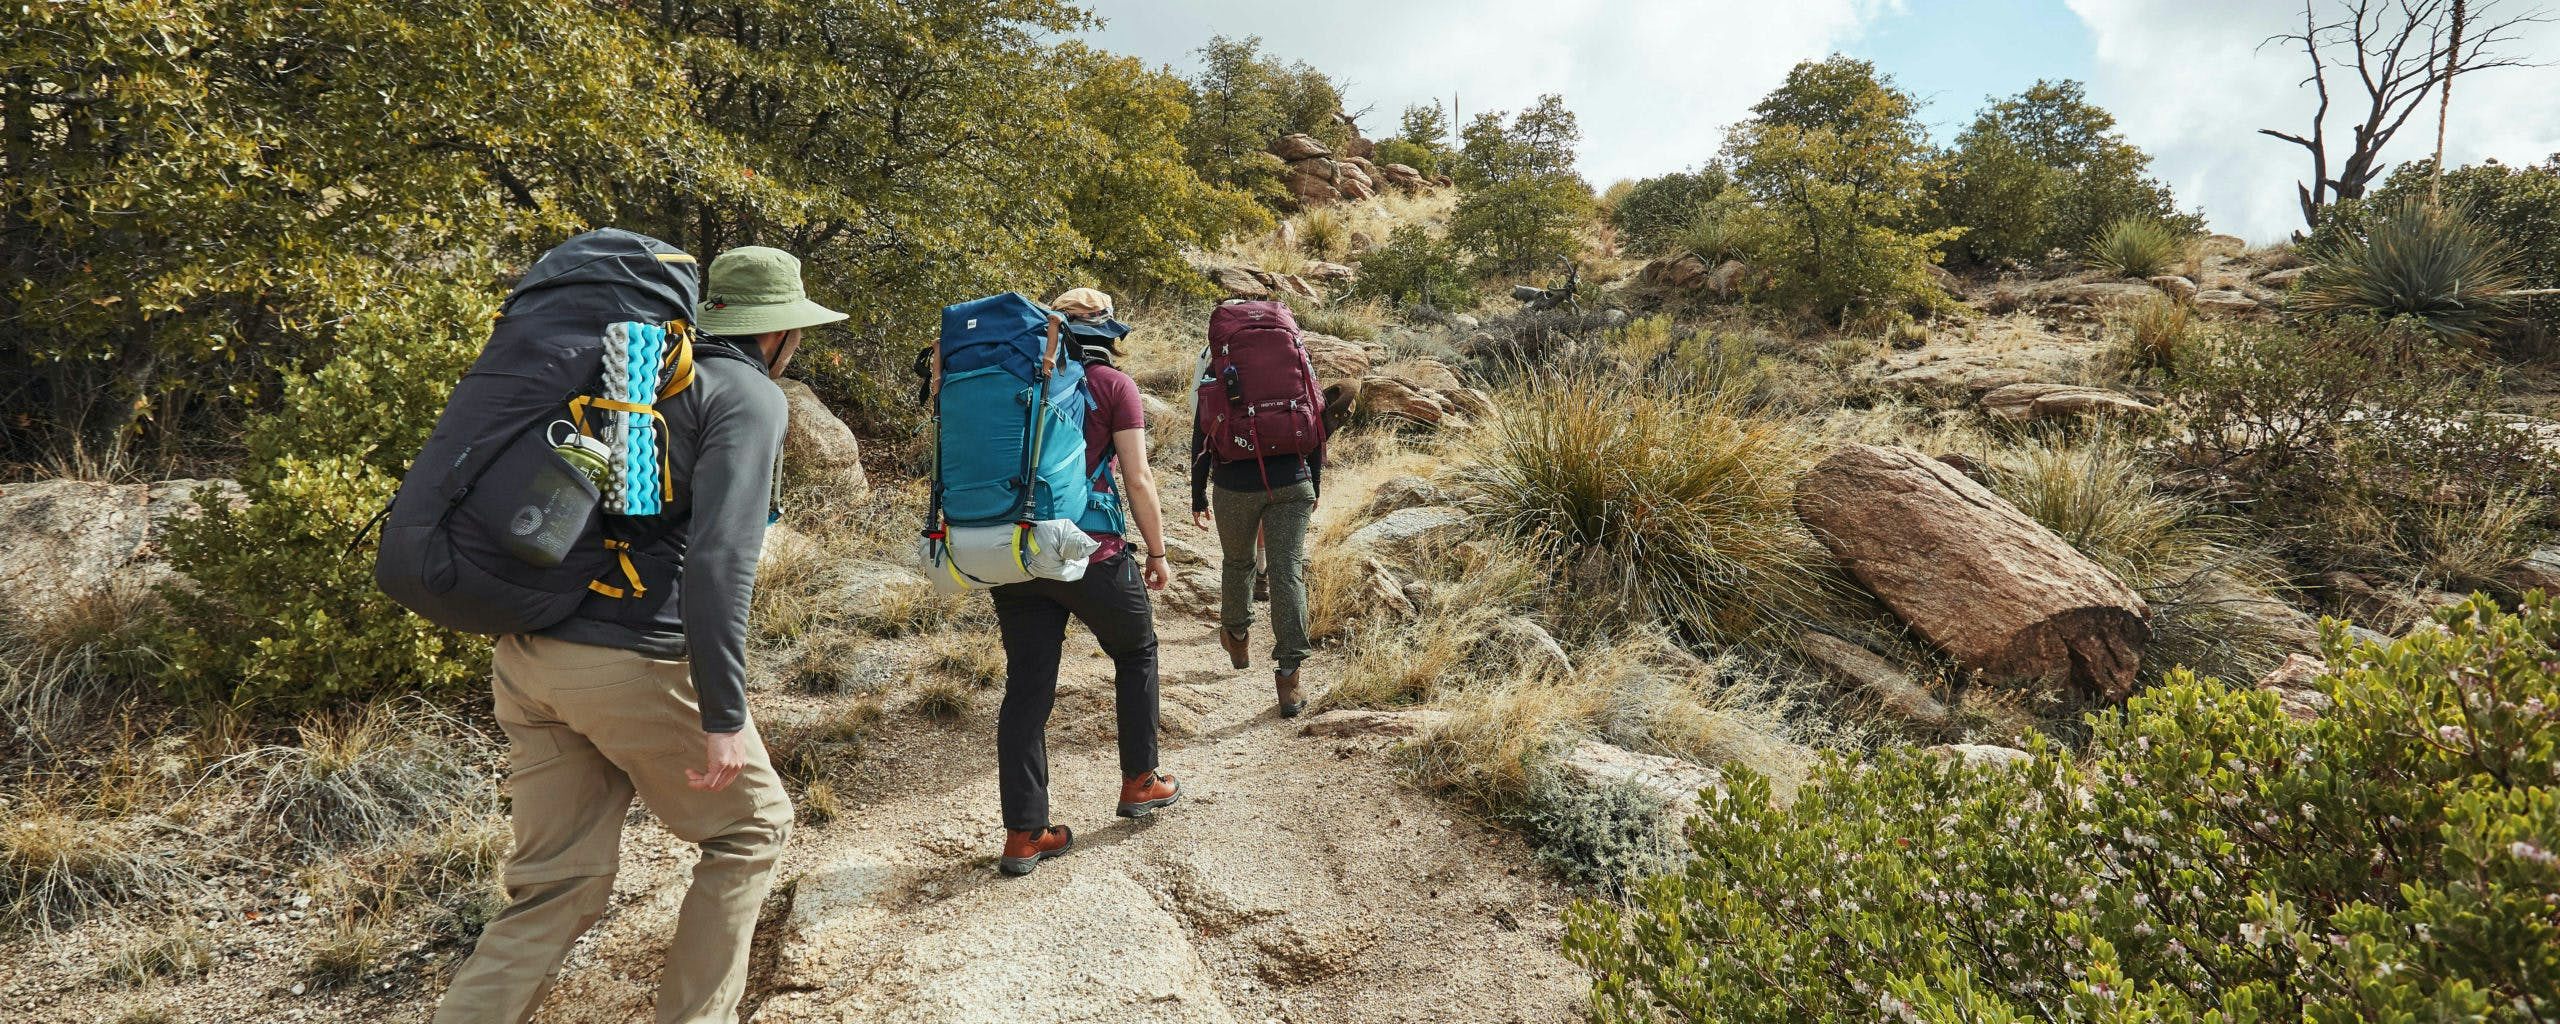 Trip planning and gear tips for your first backpacking trip.